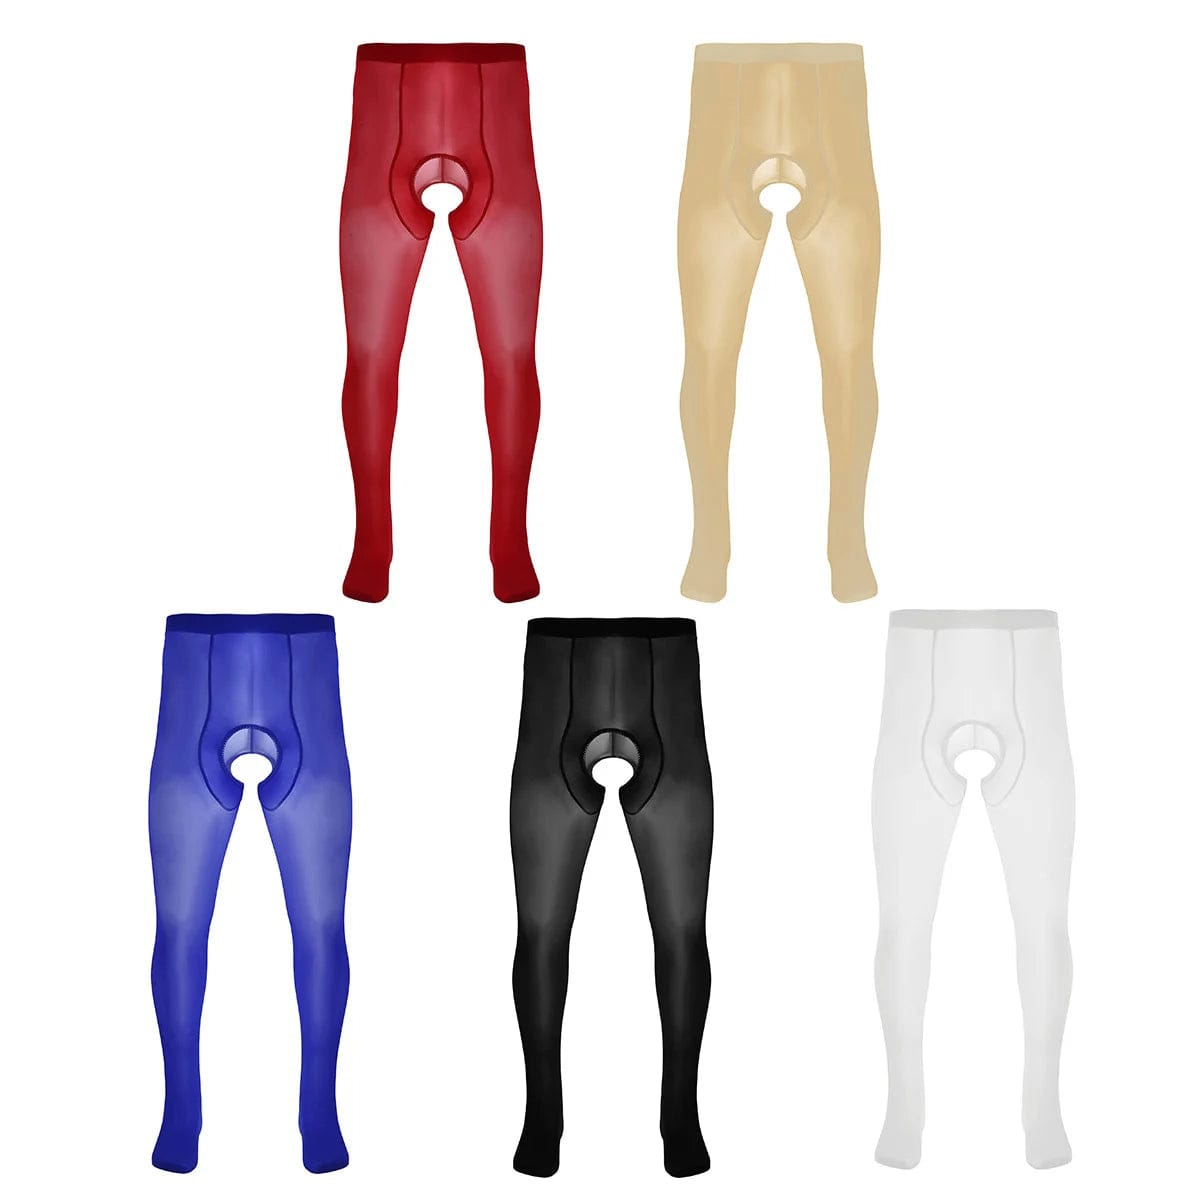 Kinky Cloth Men Ice Silk Bedtime Surprise Pantyhose Closed Toes Crotchless Stretchy Stockings Tights Hosiery Legging Pant Underwear